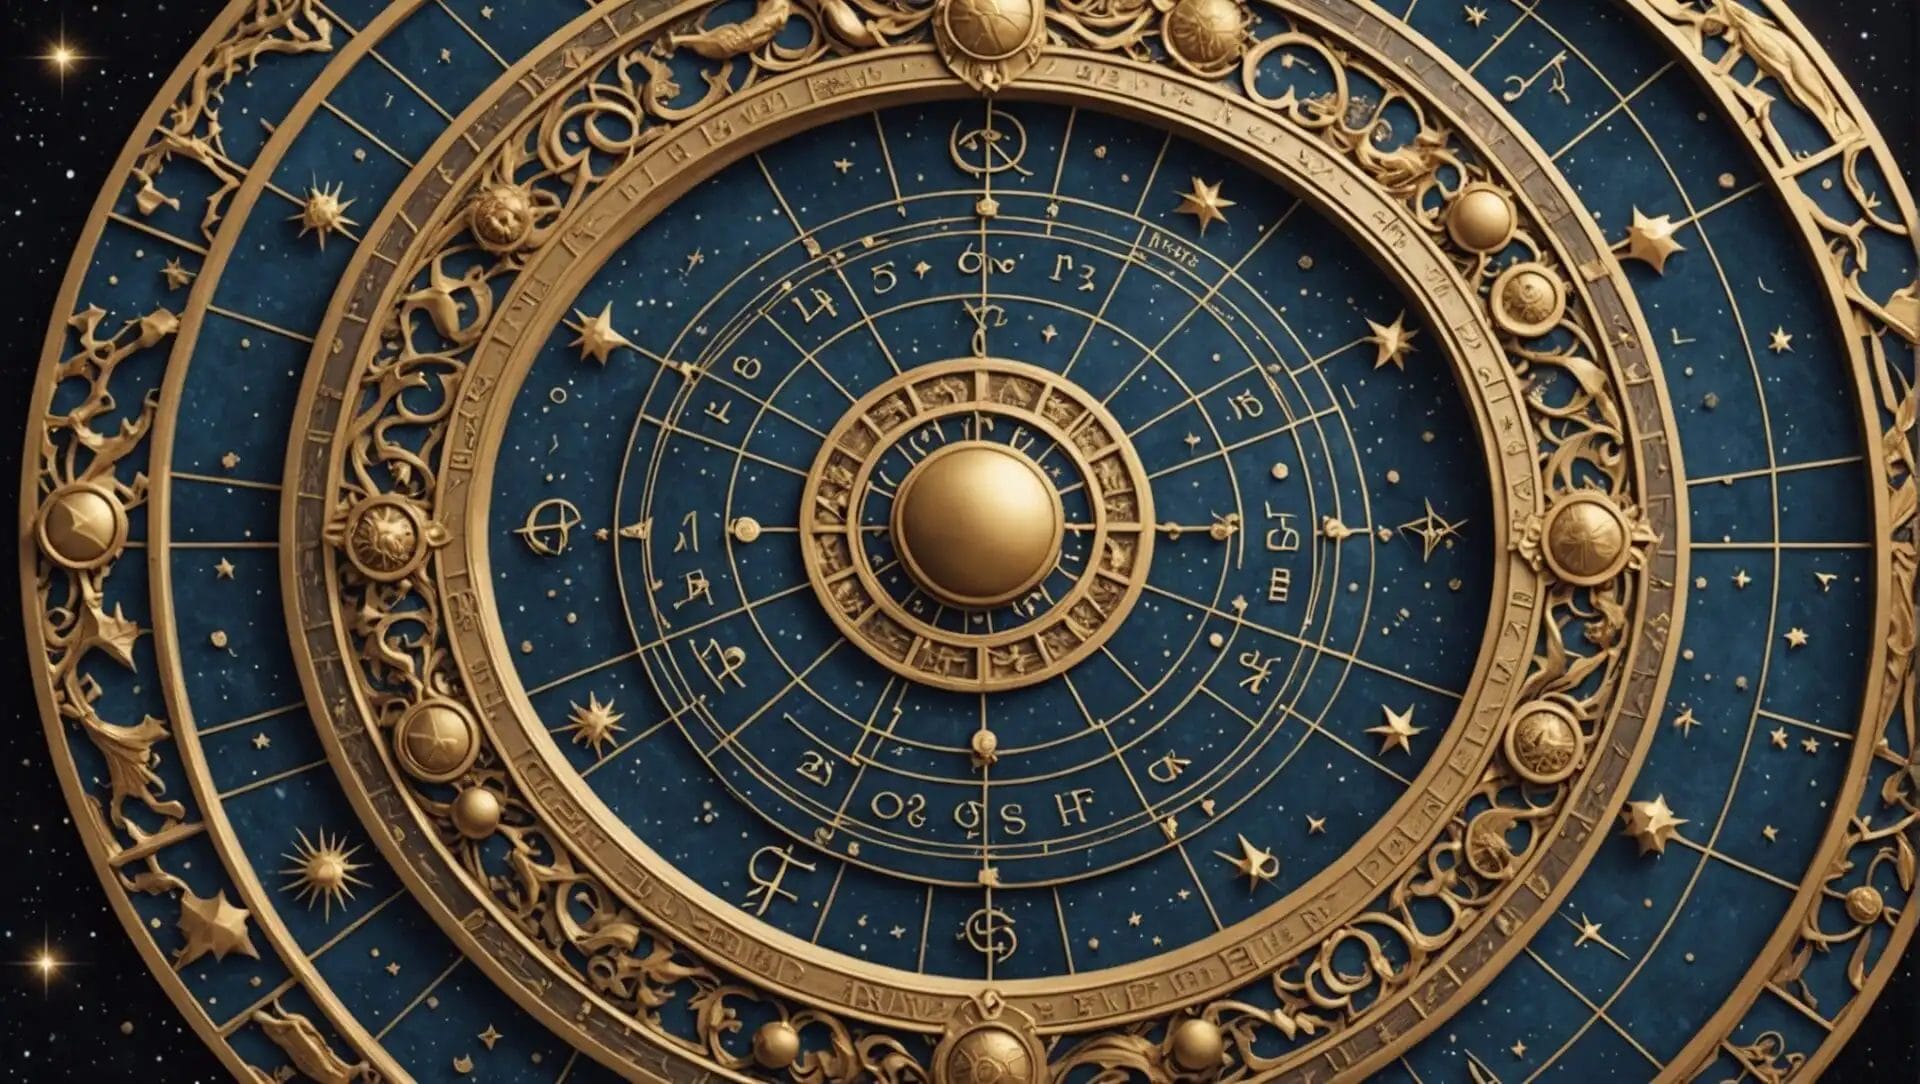 how to find lost things using astrology